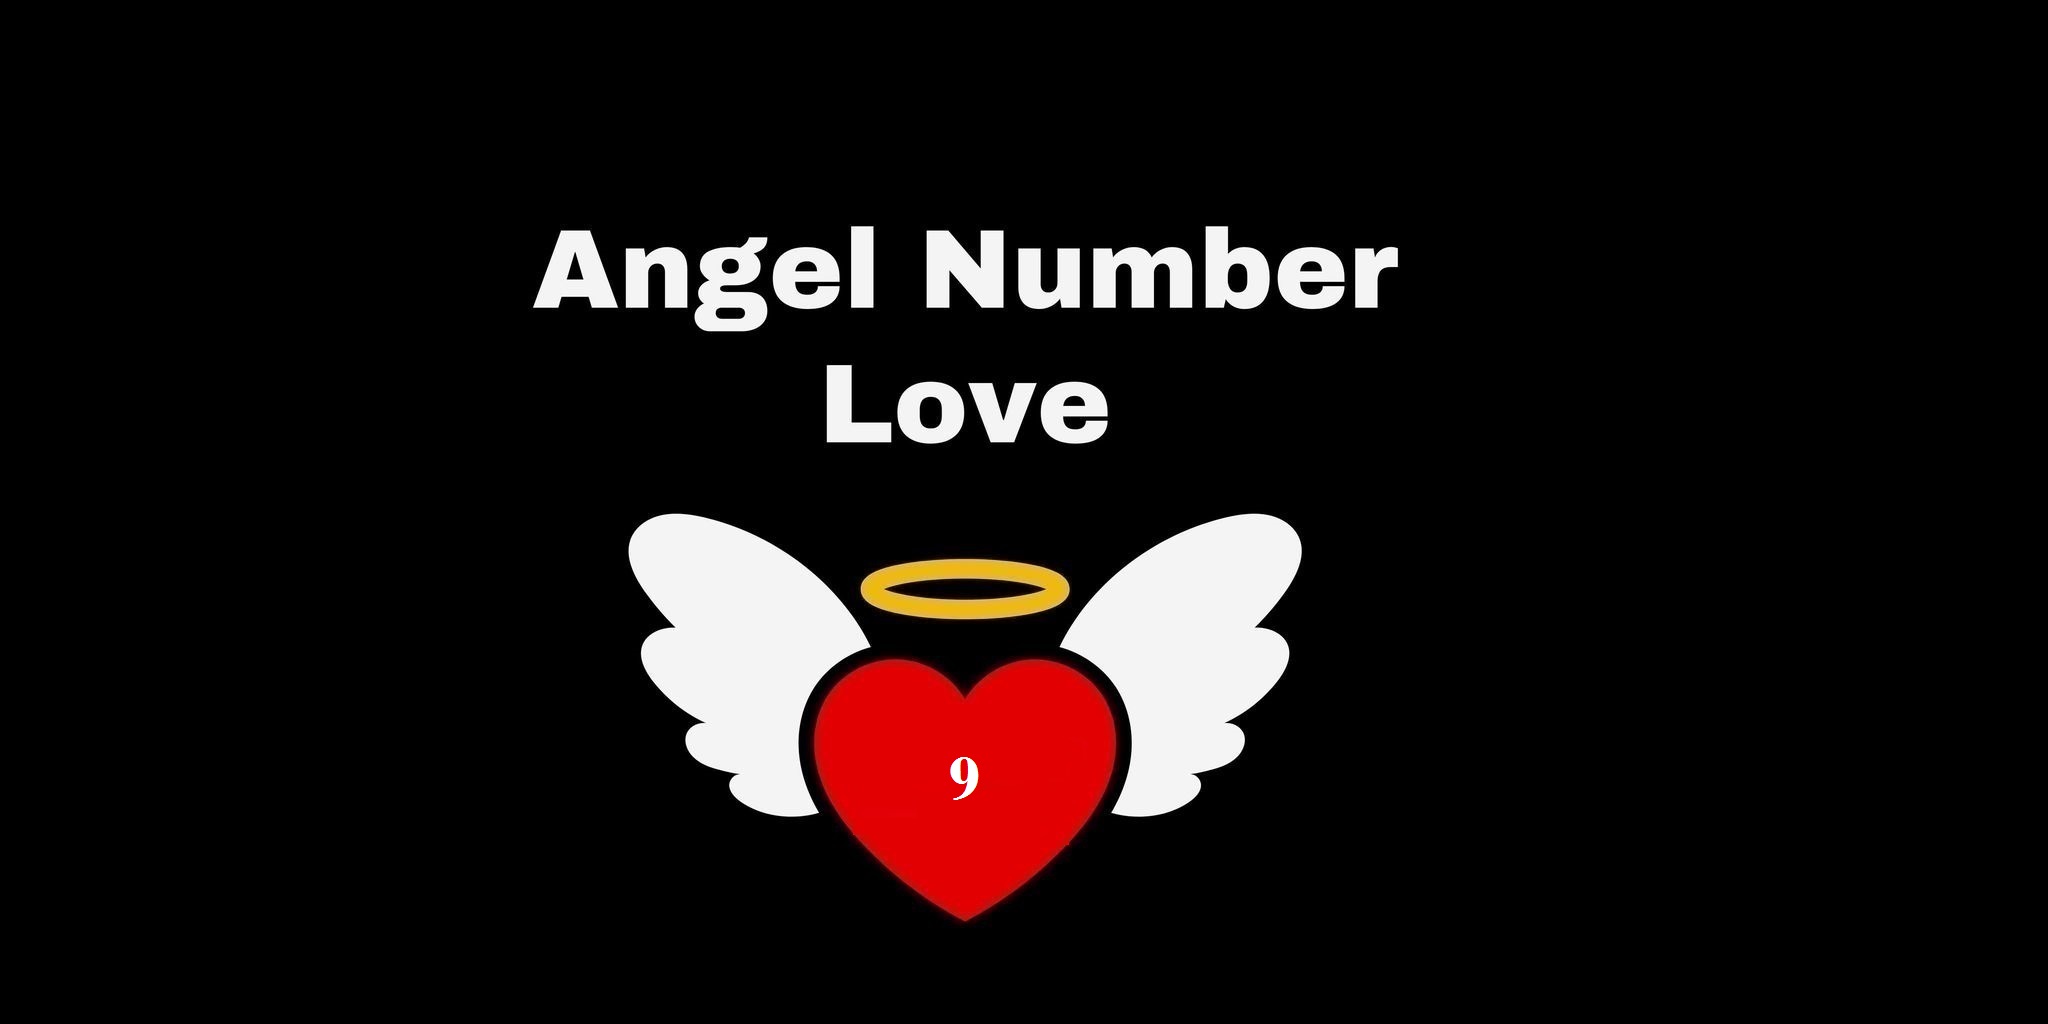 9 Angel Number Meaning In Love